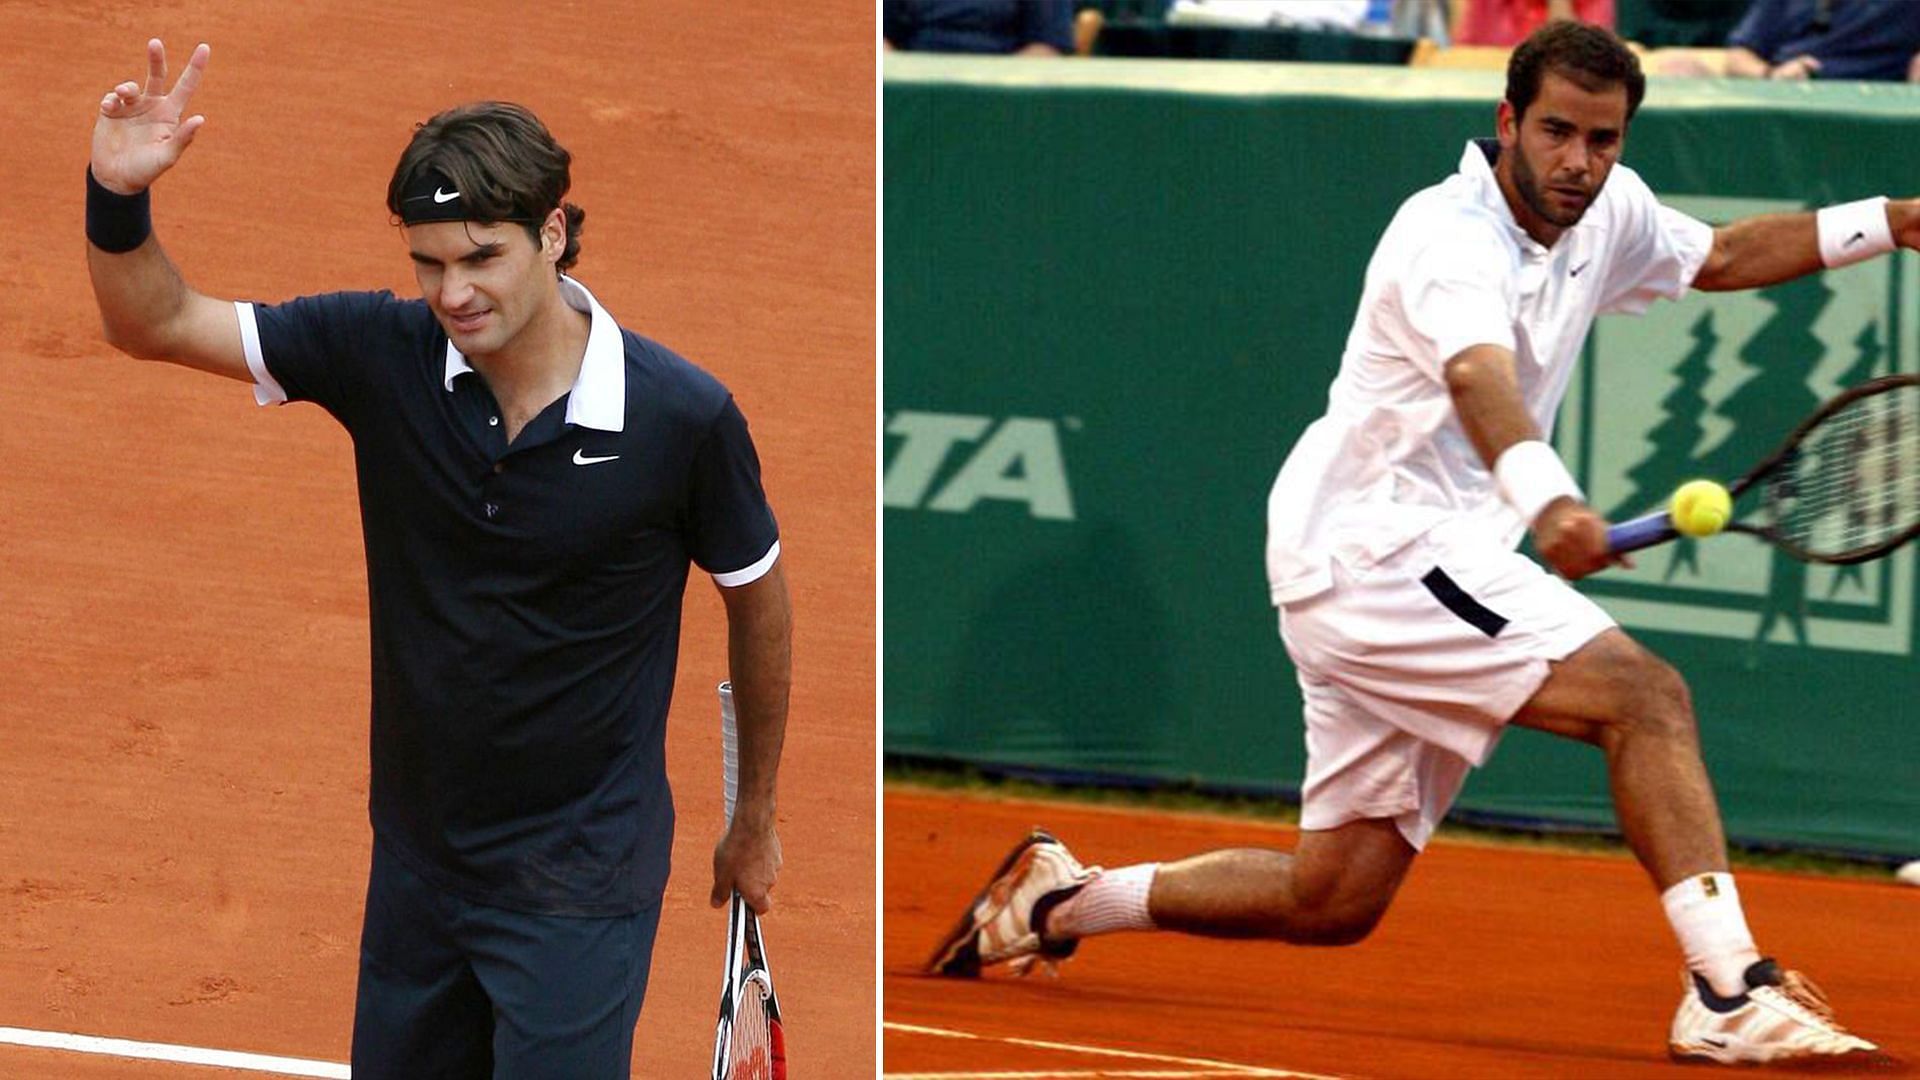 Both Federer and Sampras counted clay as their least favored surface